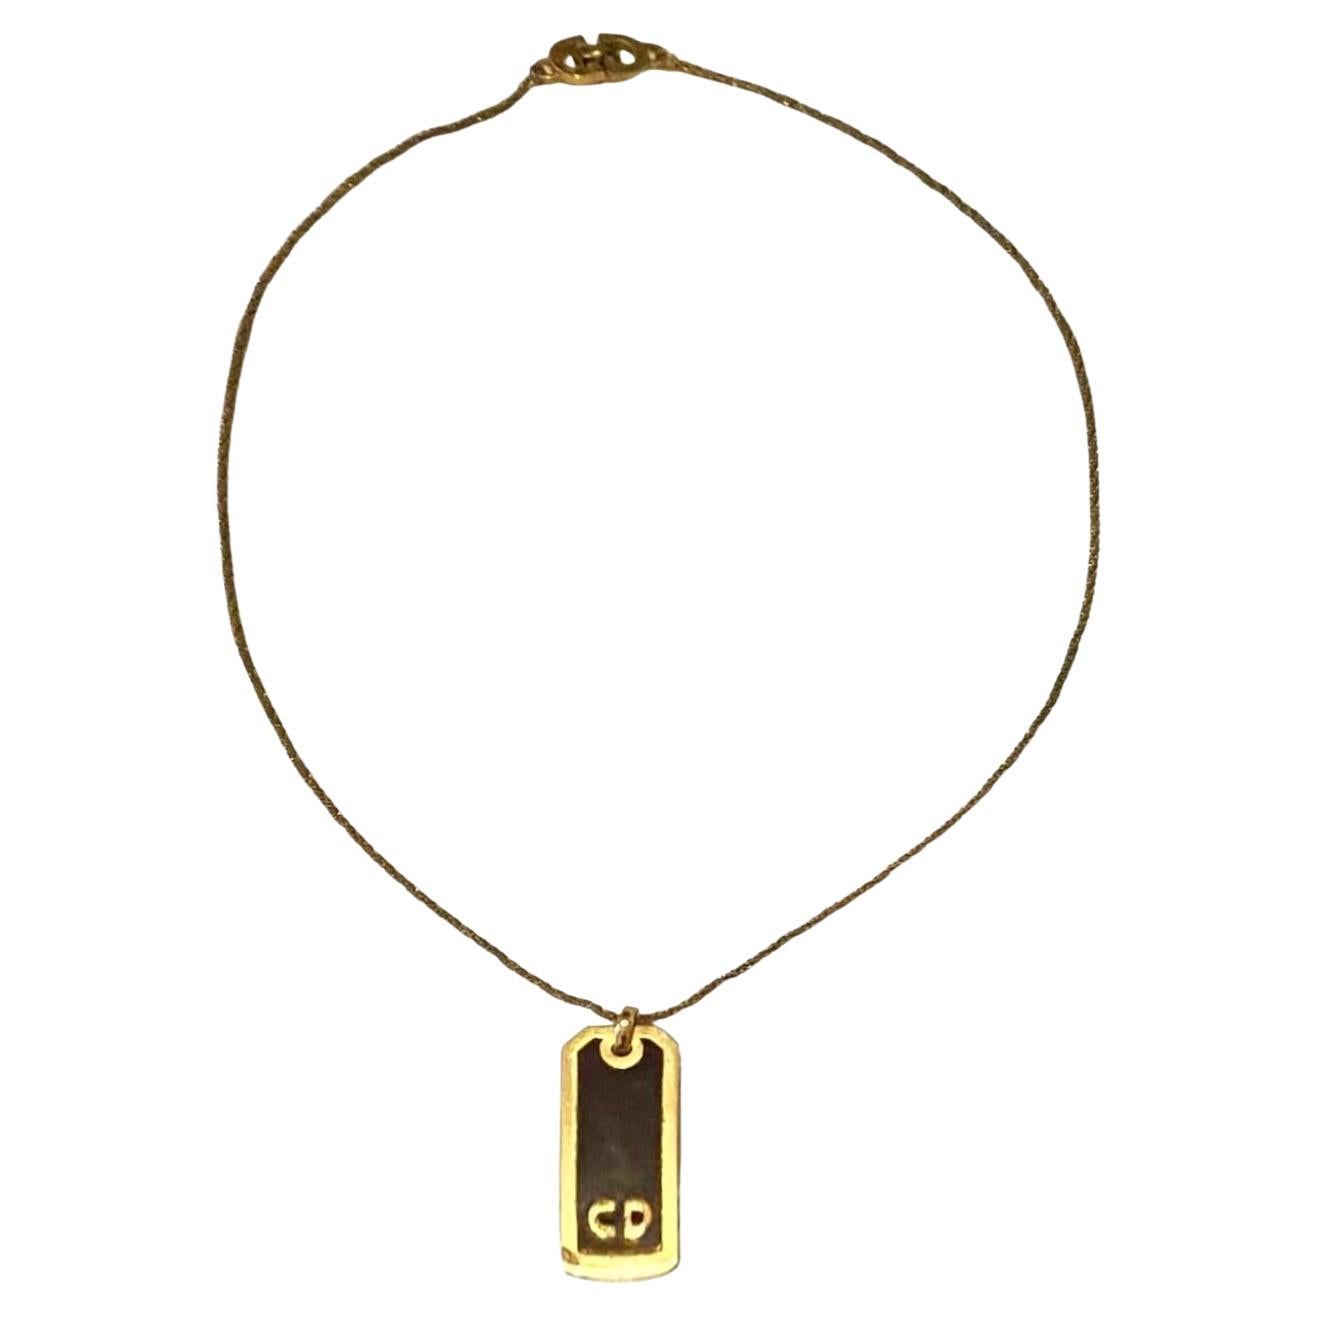 Stylish 1980s Christian Dior Logo Plaque Pendant Necklace, featuring a vertical plaque enameled pendant adorned with the iconic CD logo, crafted and marked with 